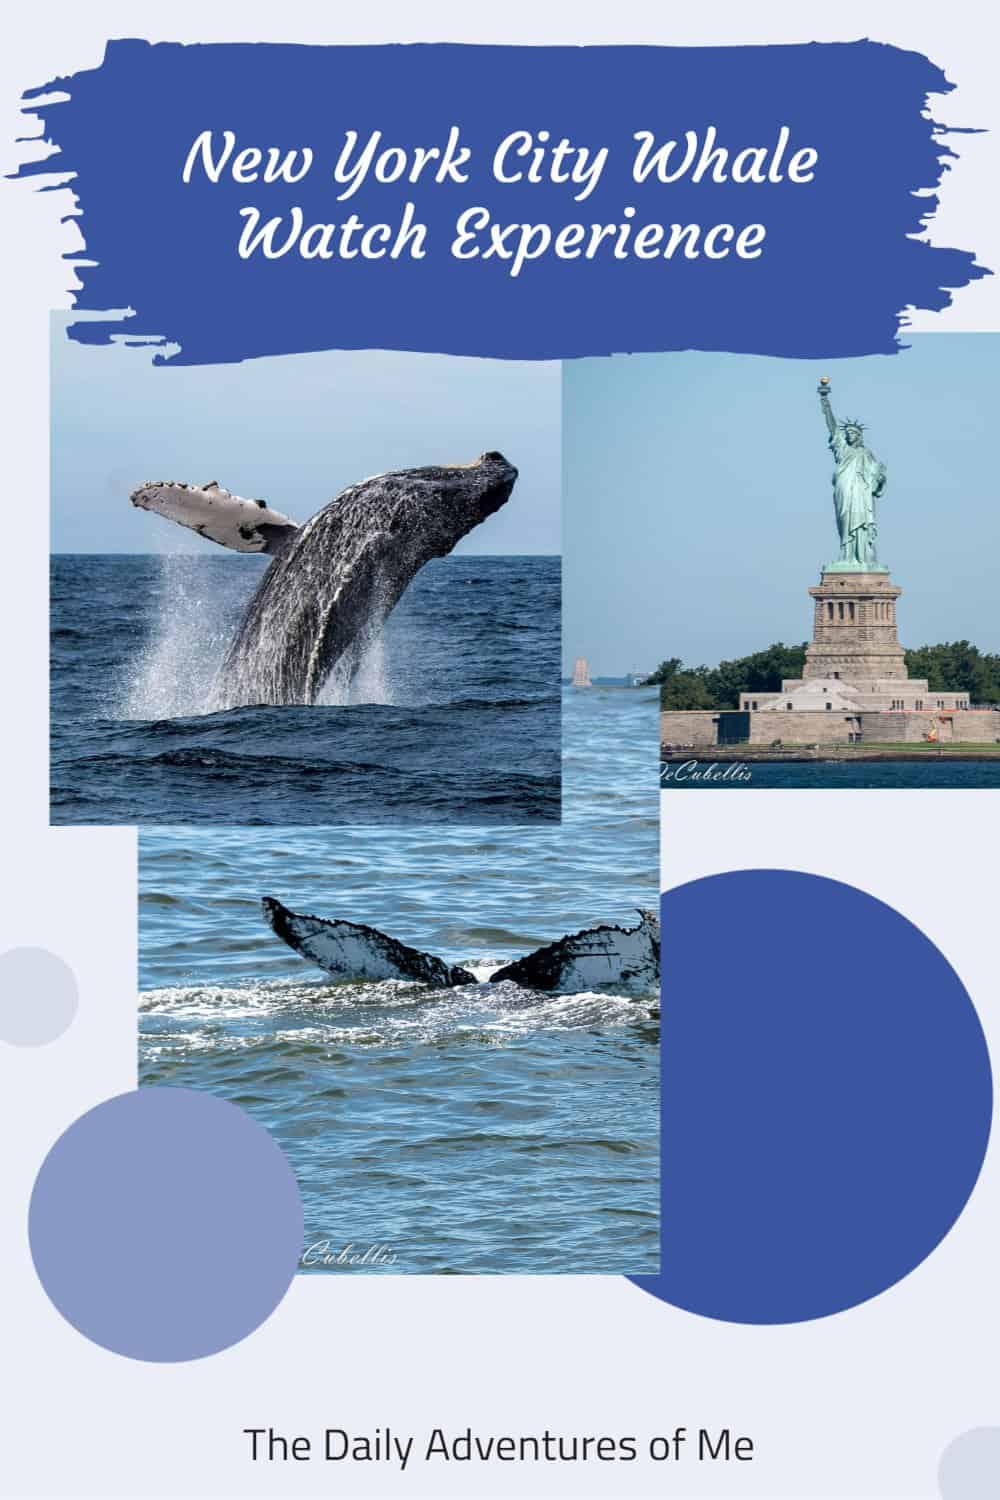 Read on to see why this whale watch from New York City delighted my whole family! #hosted #humpbackwhales #nature #NYCcruises